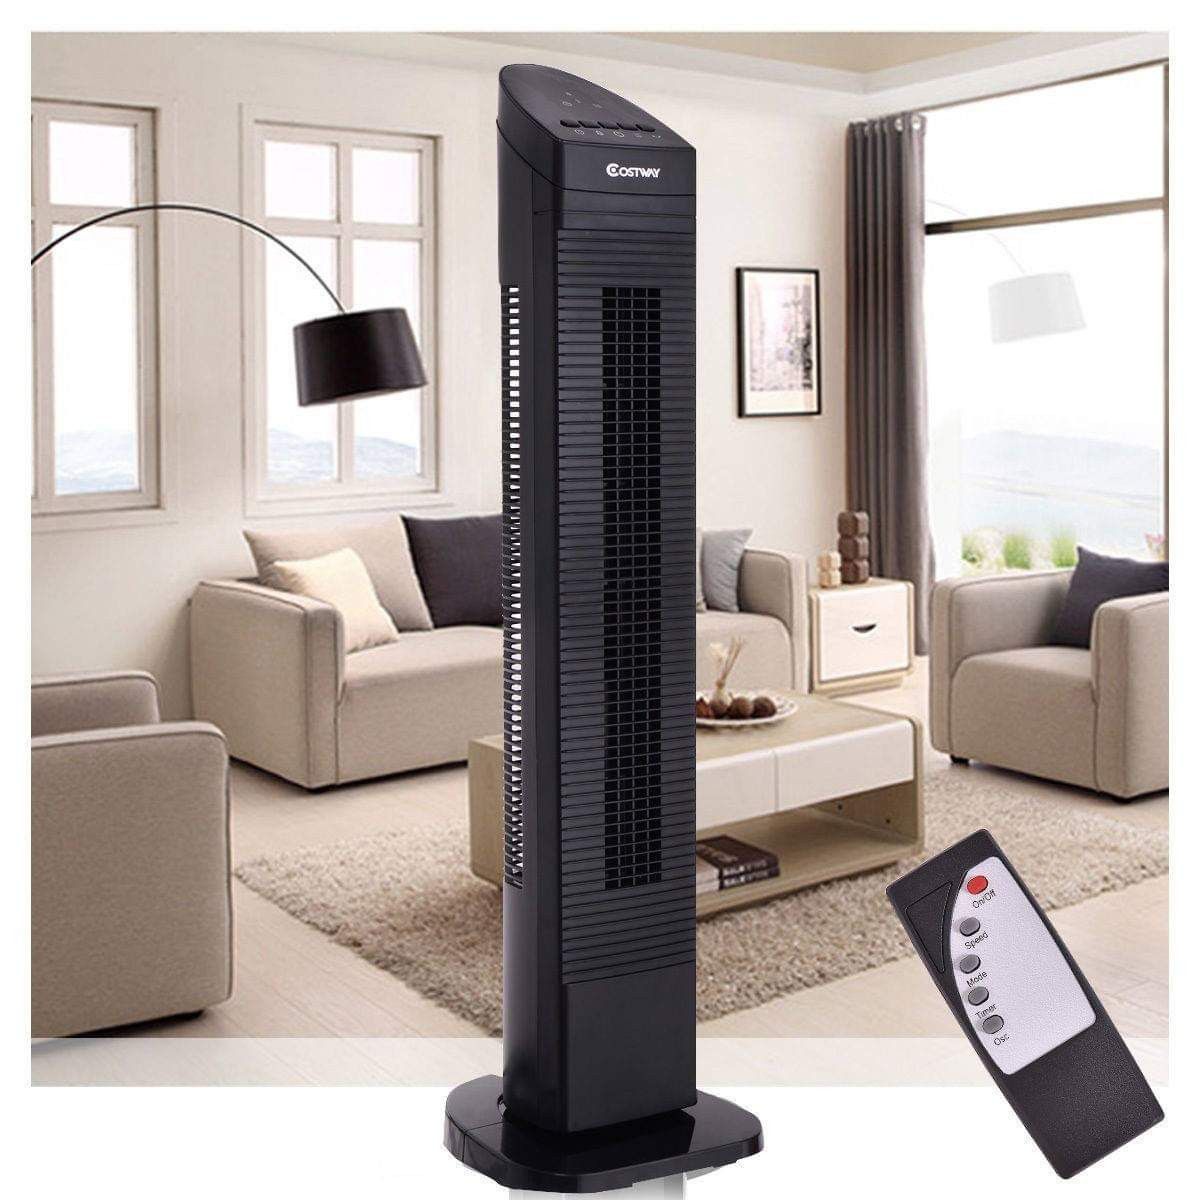 Oscillating Tower Fan Remote Rotating Tall Cooling Home Living Room Bedroom Adjustable